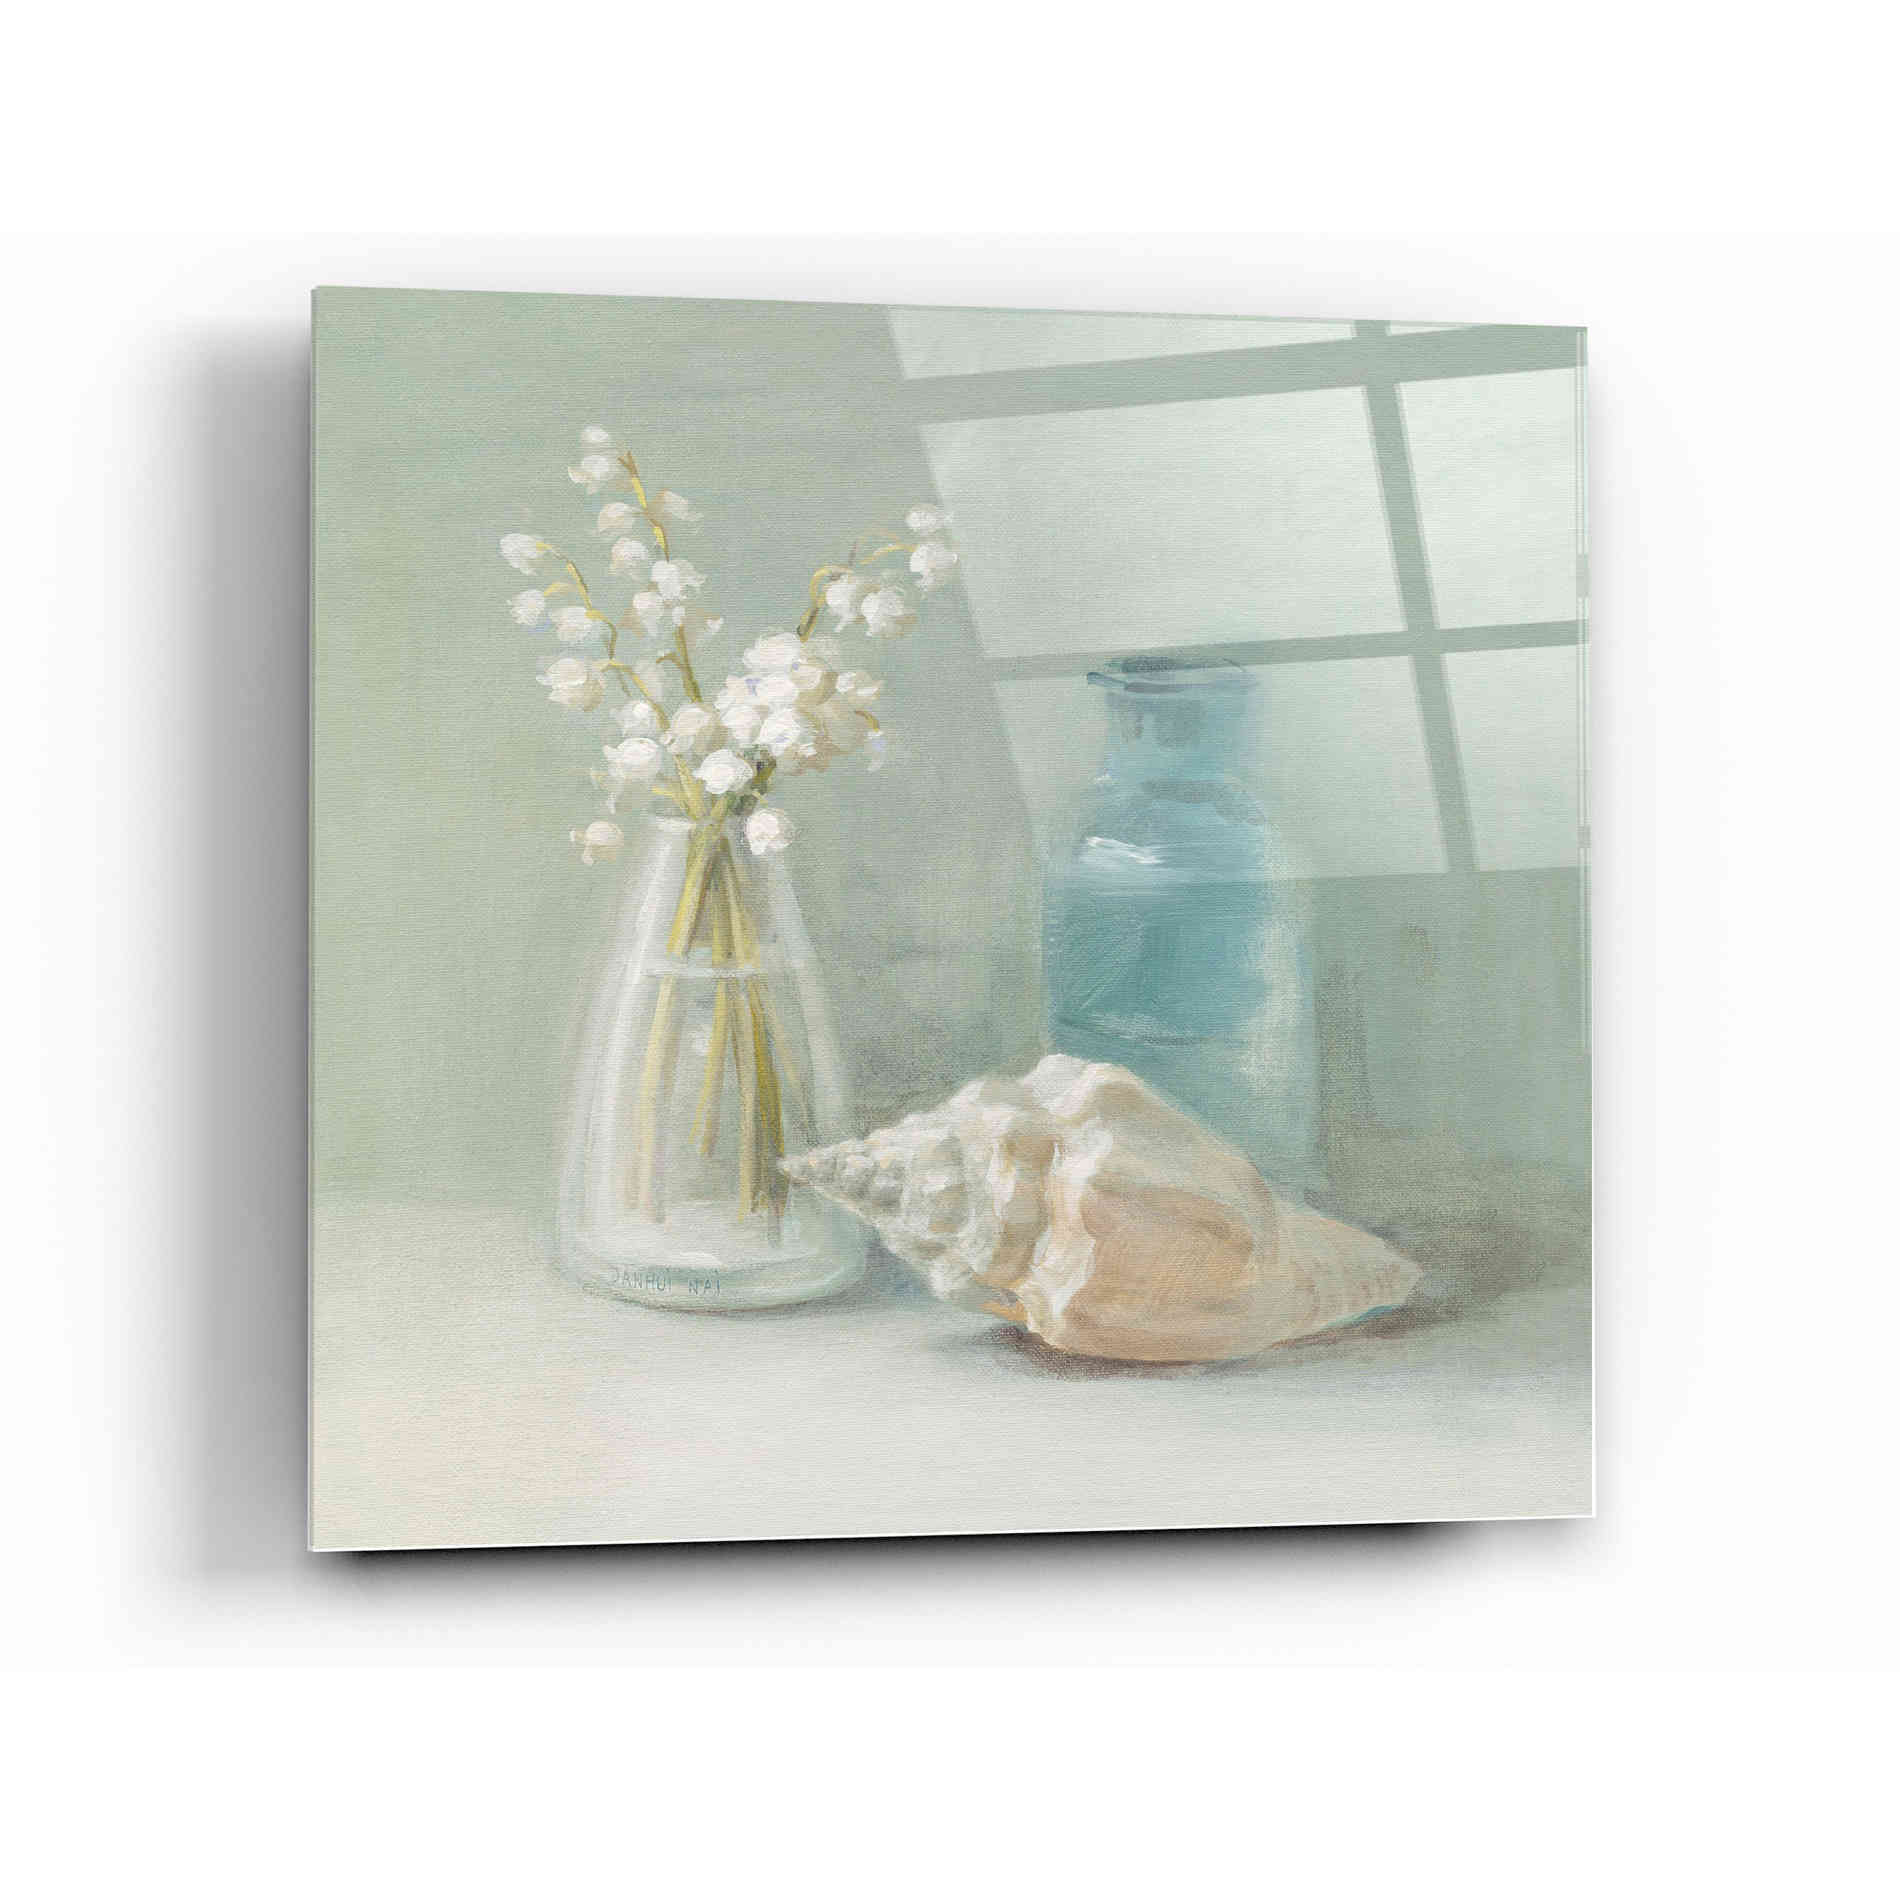 Epic Art 'Lily of the Valley Spa' by Danhui Nai, Acrylic Glass Wall Art,12 x 12